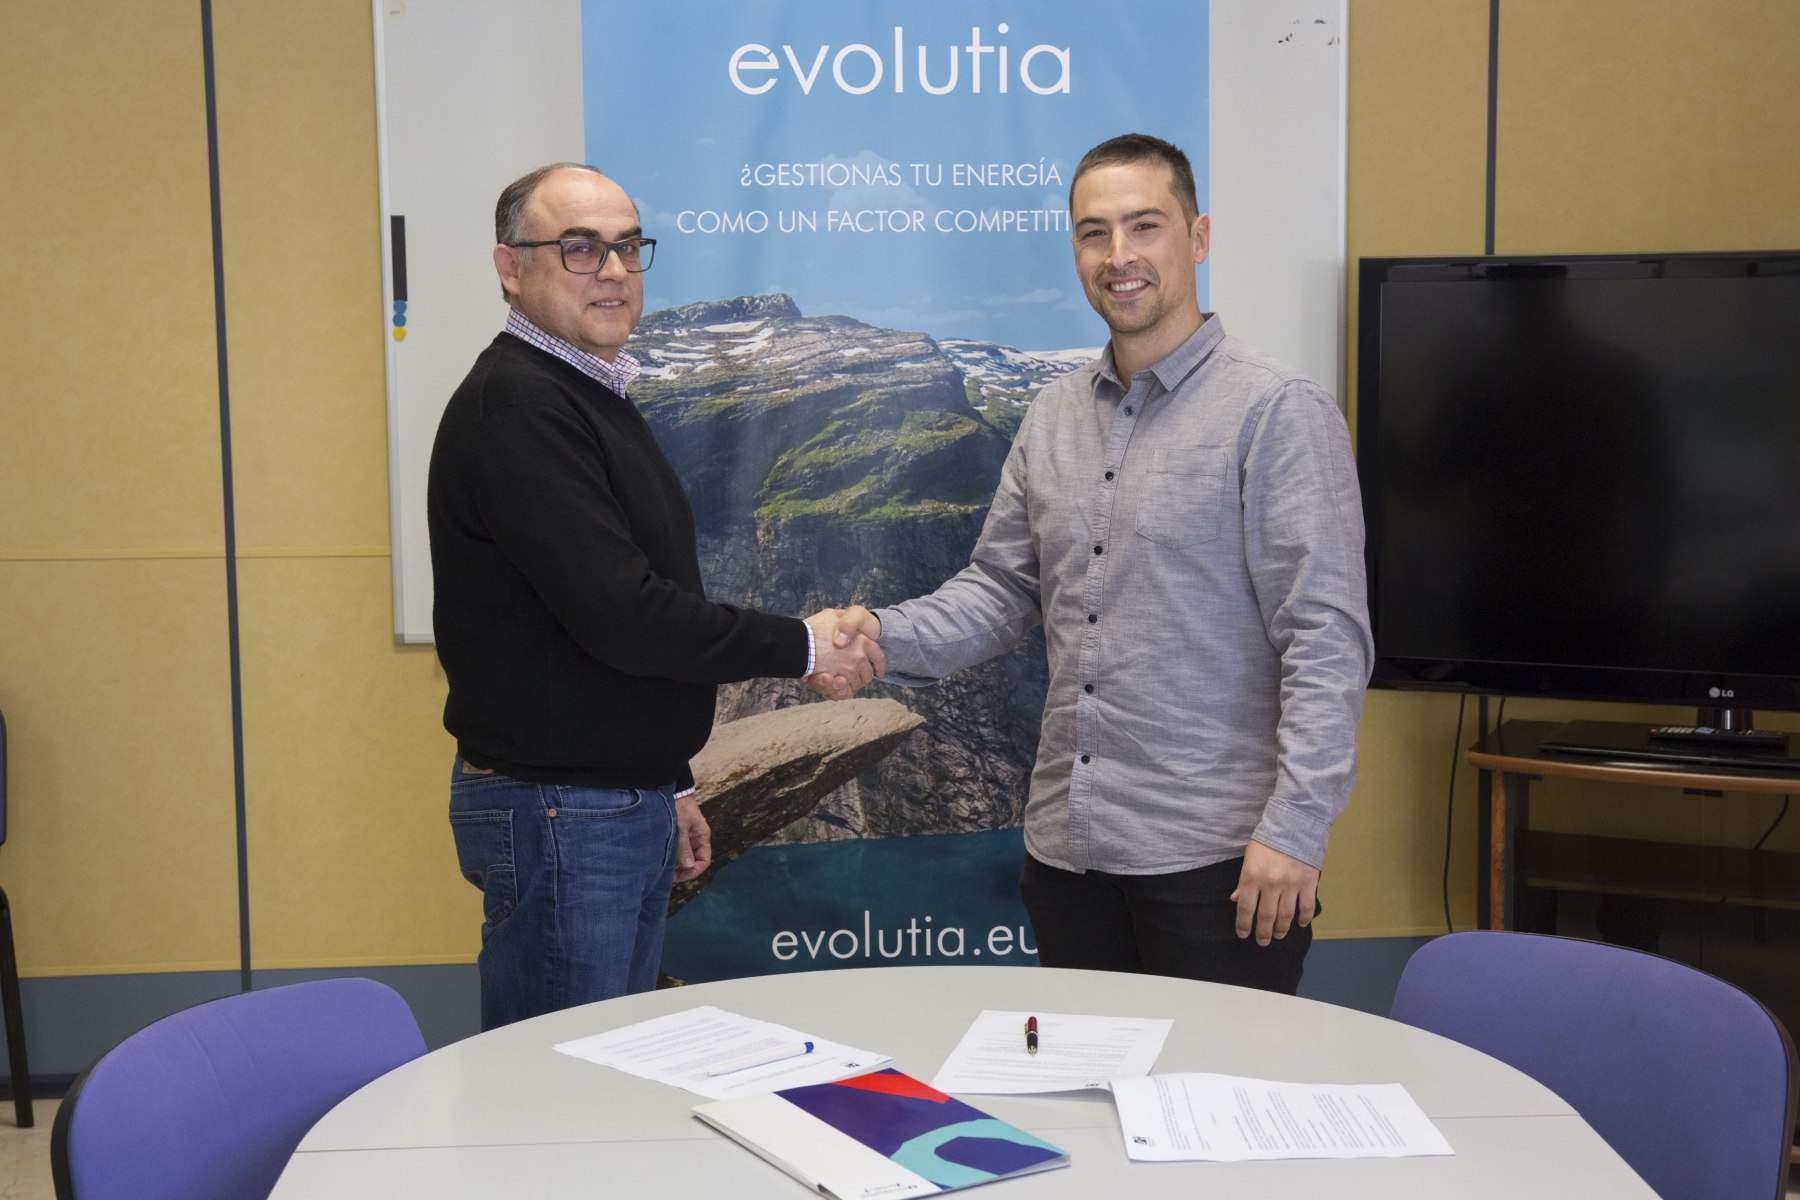 EVOLUTIA IS PART OF THE MASTER'S DEGREE OF ENERGY EFFICIENCY AT THE JAIME I UNIVERSITY OF CASTELLÓN